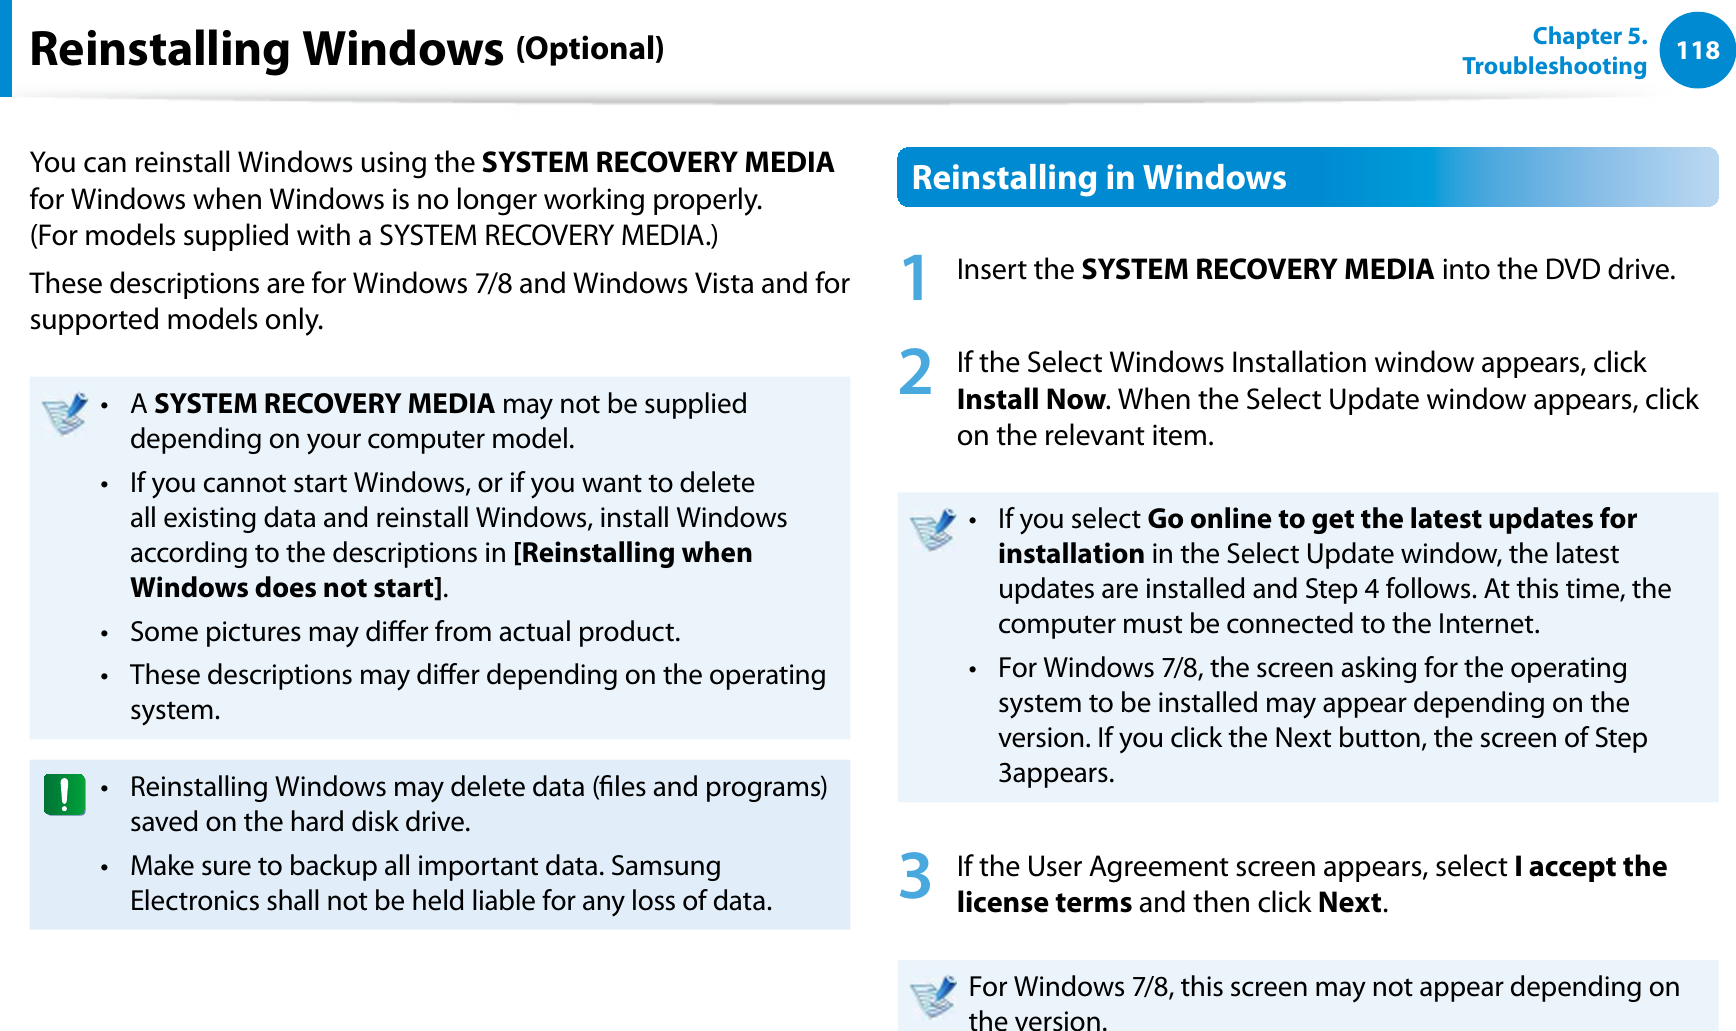 118Chapter 5.   TroubleshootingReinstalling Windows (Optional)You can reinstall Windows using the SYSTEM RECOVERY MEDIA for Windows when Windows is no longer working properly.  (For models supplied with a SYSTEM RECOVERY MEDIA.)These descriptions are for Windows 7/8 and Windows Vista and for supported models only.A t SYSTEM RECOVERY MEDIA may not be supplied depending on your computer model.If you cannot start Windows, or if you want to delete t all existing data and reinstall Windows, install Windows according to the descriptions in [Reinstalling when Windows does not start].Some pictures may dier from actual product.t These descriptions may dier depending on the operating t system.Reinstalling Windows may delete data (les and programs) t saved on the hard disk drive.Make sure to backup all important data. Samsung t Electronics shall not be held liable for any loss of data.Reinstalling in Windows1 Insert the SYSTEM RECOVERY MEDIA into the DVD drive.2  If the Select Windows Installation window appears, click Install Now. When the Select Update window appears, click on the relevant item.If you select t Go online to get the latest updates for installation in the Select Update window, the latest updates are installed and Step 4 follows. At this time, the computer must be connected to the Internet.For Windows 7/8, the screen asking for the operating t system to be installed may appear depending on the version. If you click the Next button, the screen of Step 3appears.3  If the User Agreement screen appears, select I accept the license terms and then click Next.For Windows 7/8, this screen may not appear depending on the version.